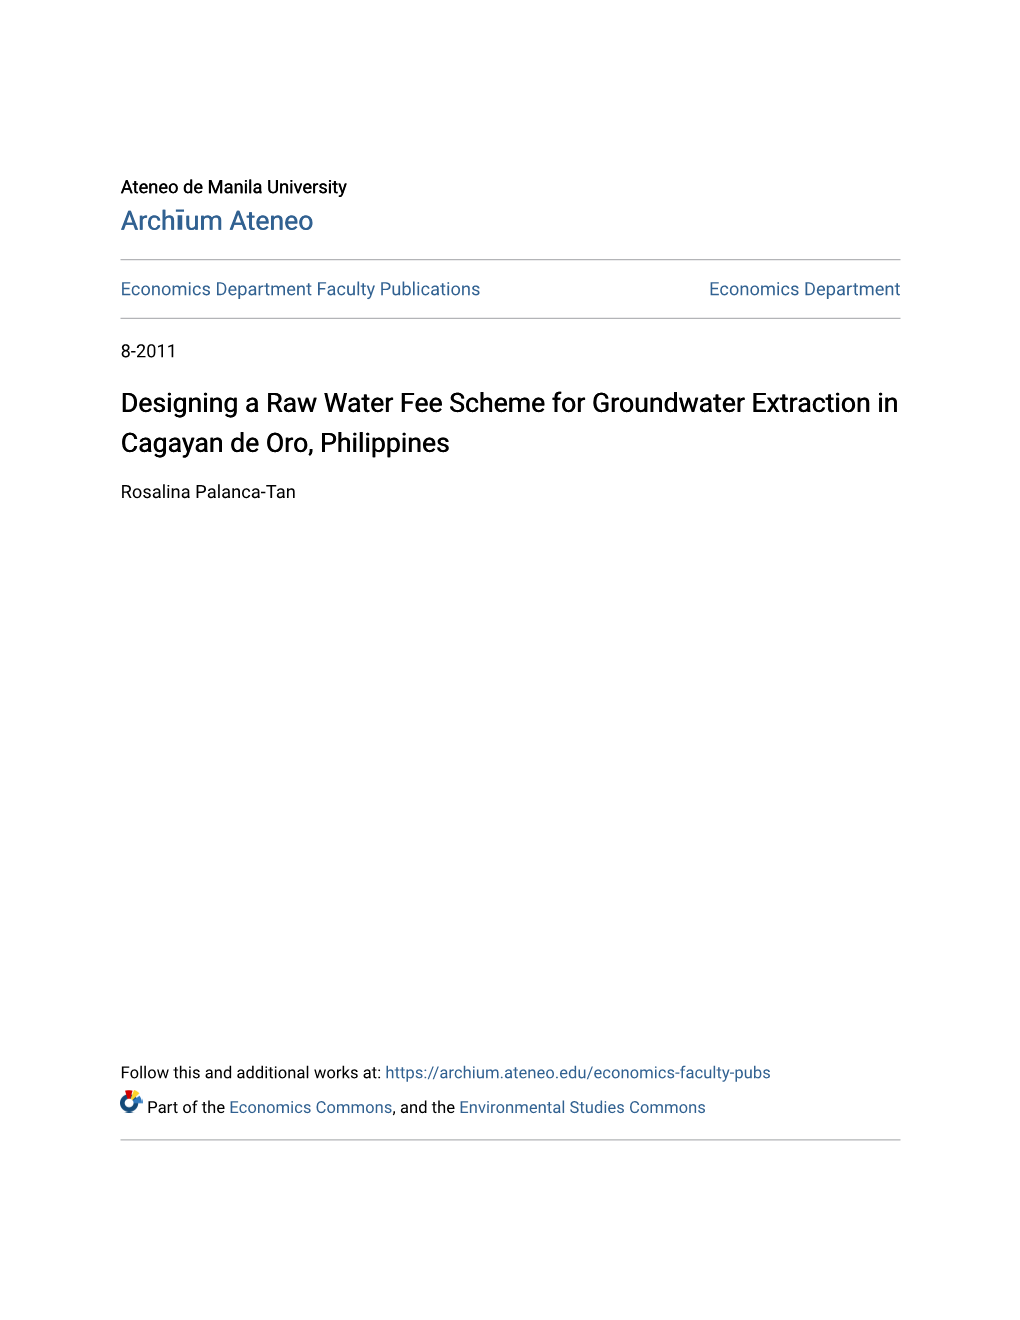 Designing a Raw Water Fee Scheme for Groundwater Extraction in Cagayan De Oro, Philippines